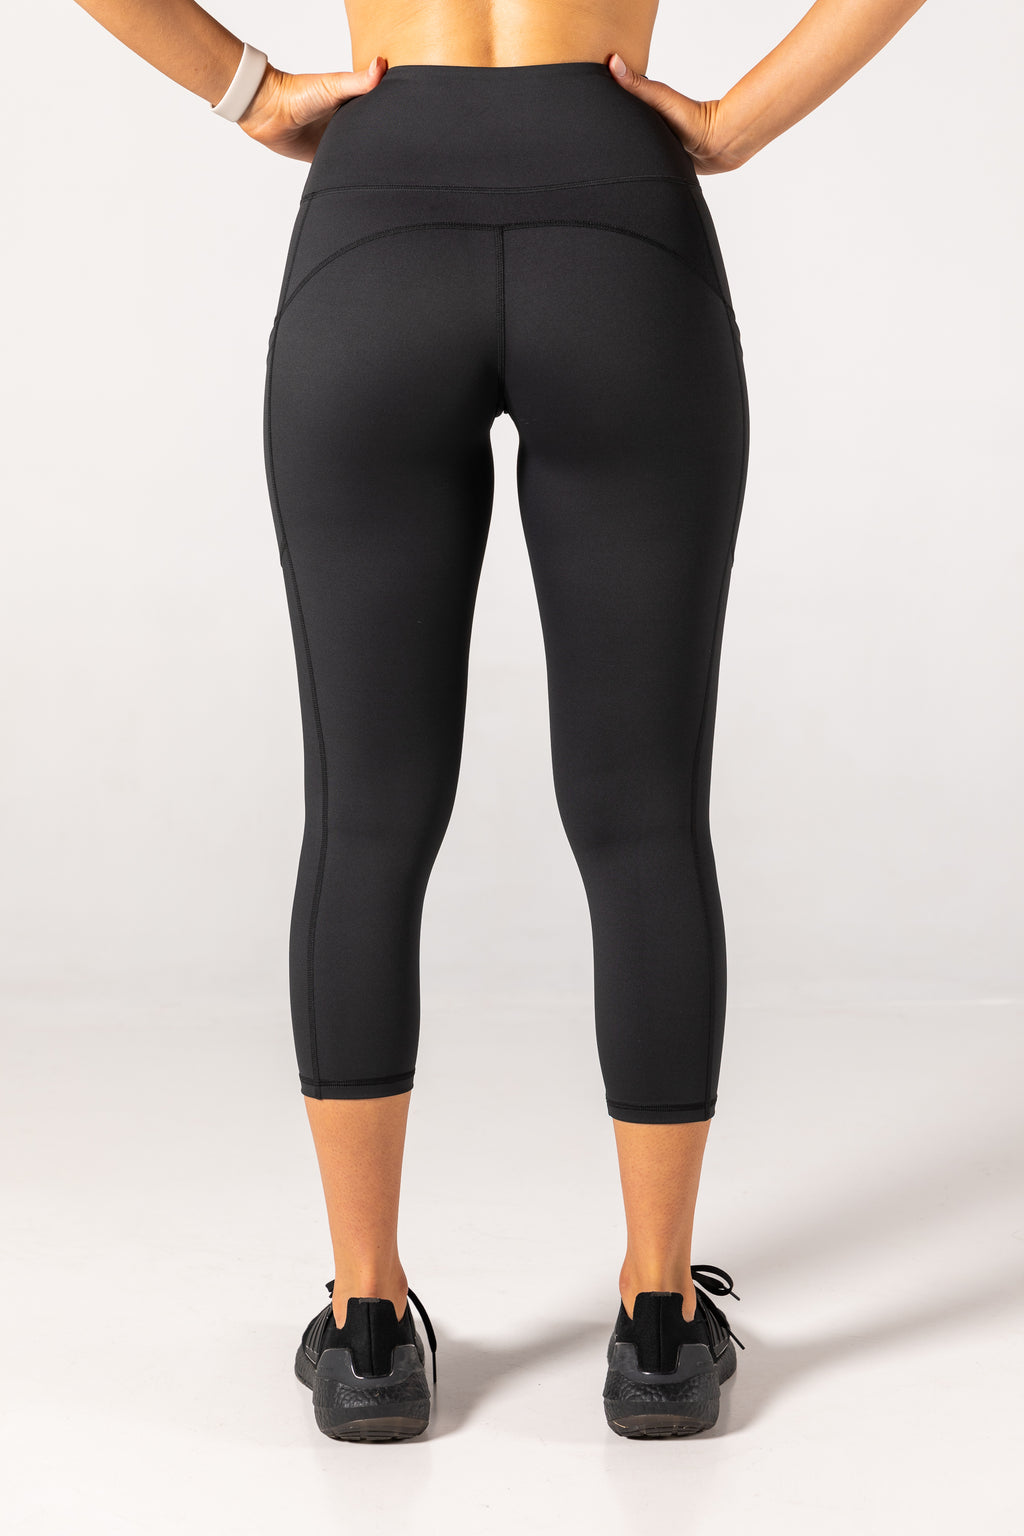 Deezi Active Maddy Leggings  Best Selling Performance Tights